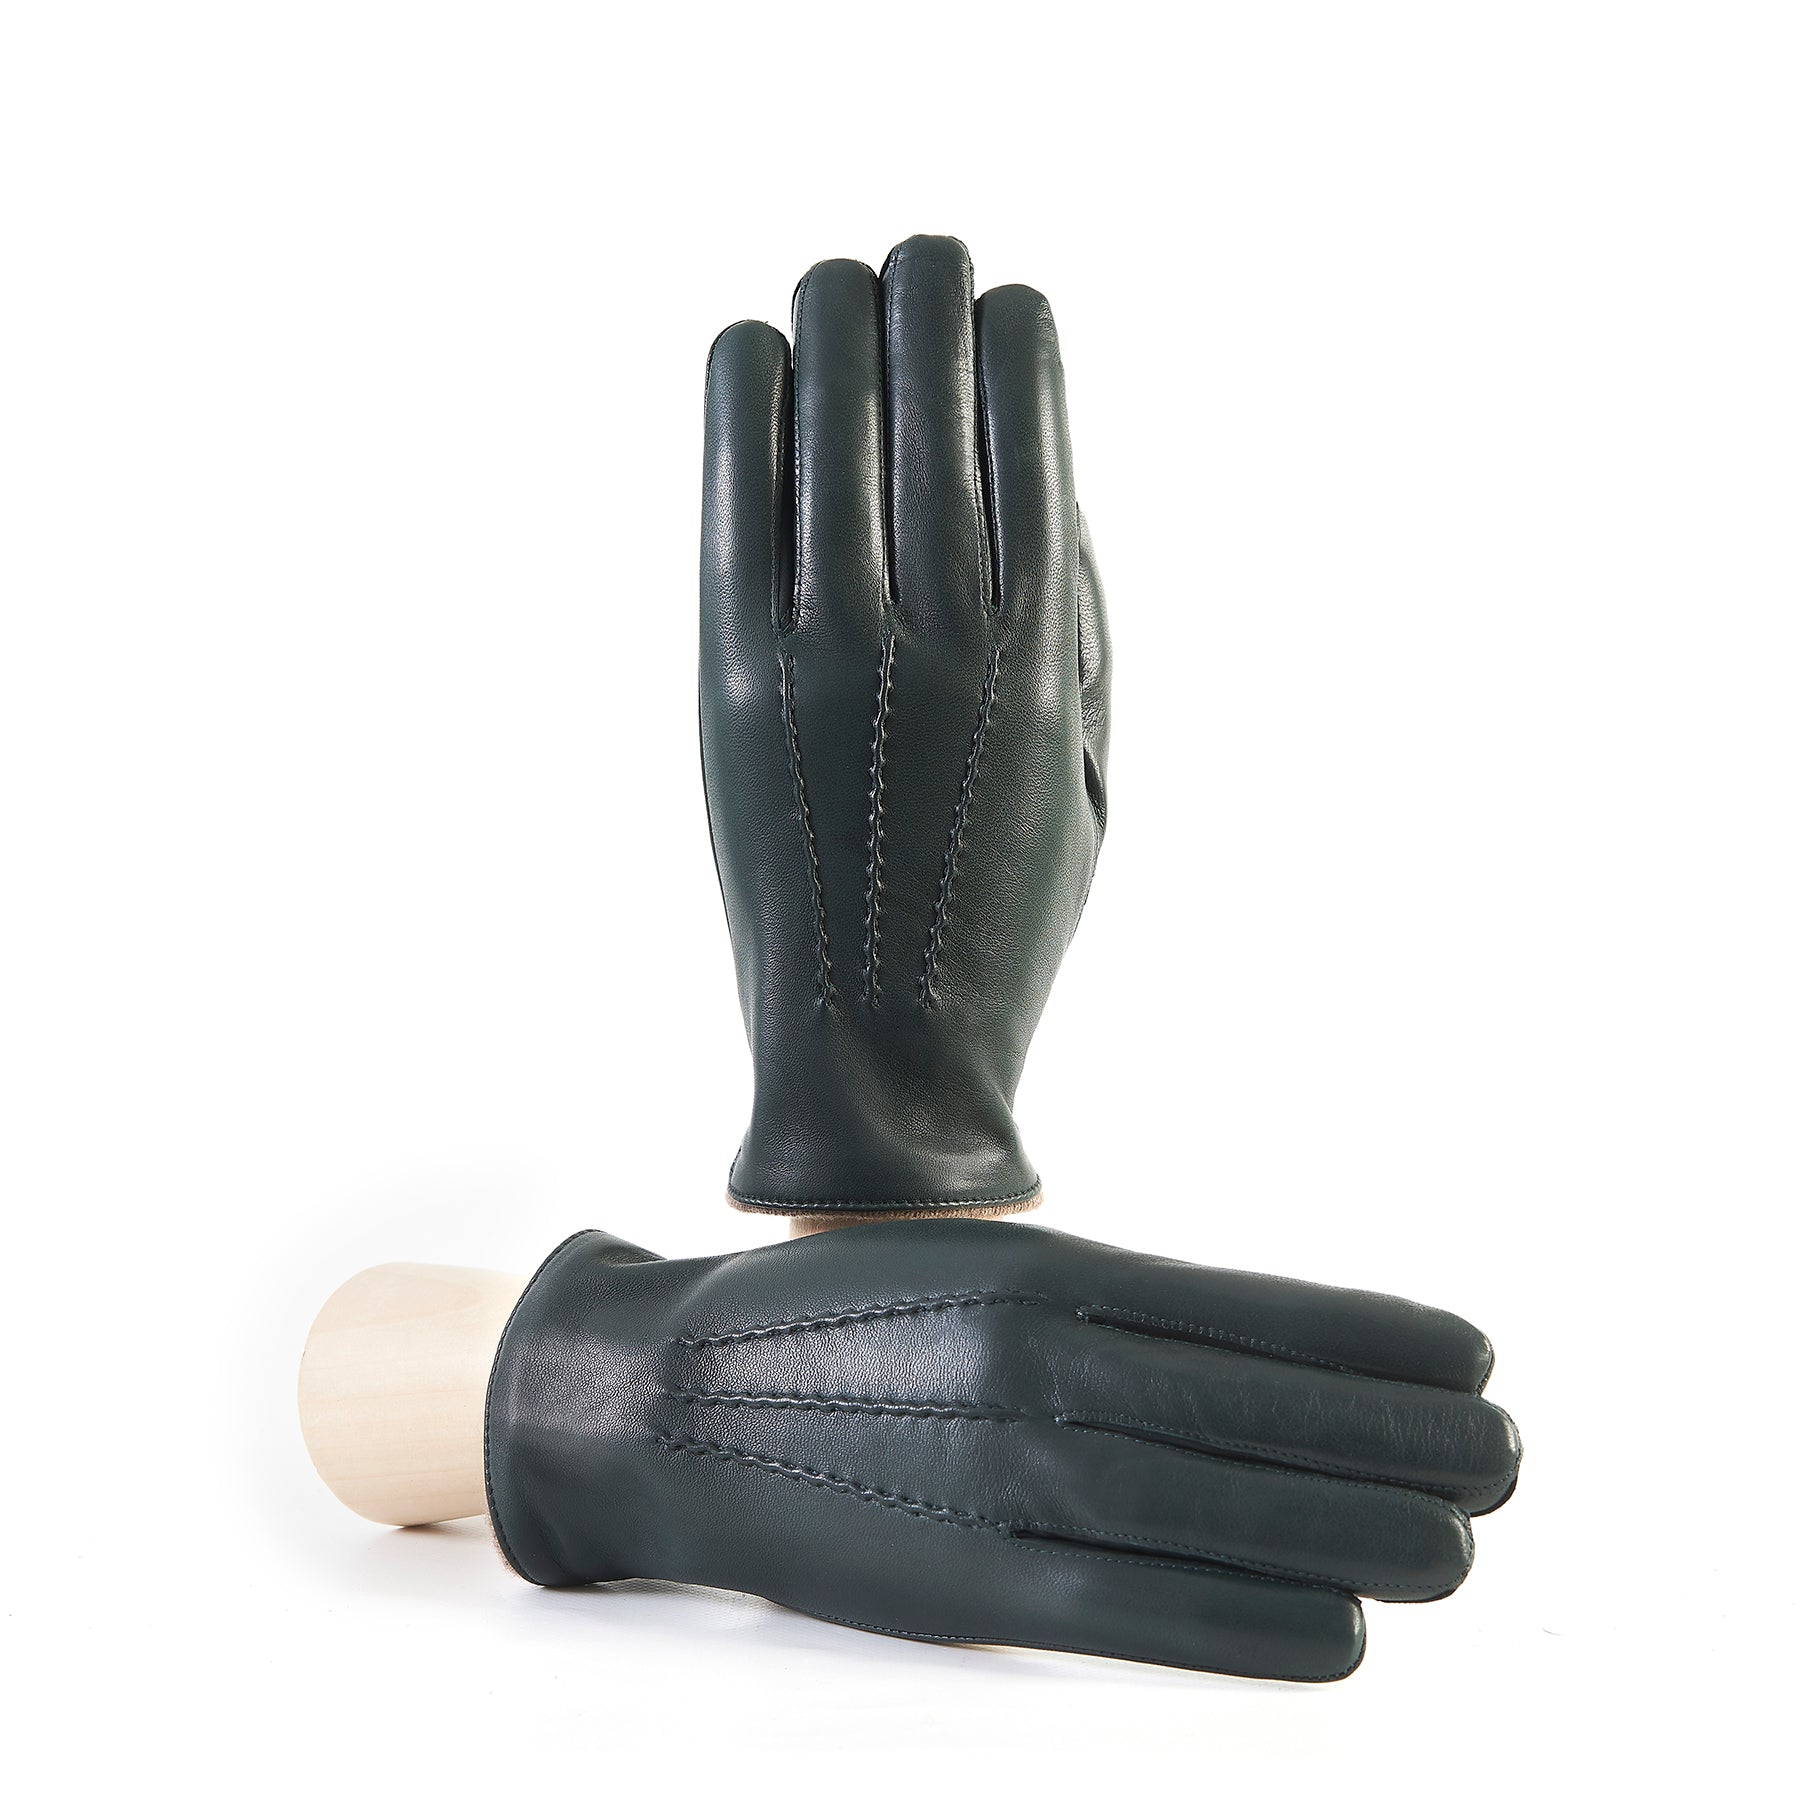 Men's green nappa leather gloves and cashmere lining